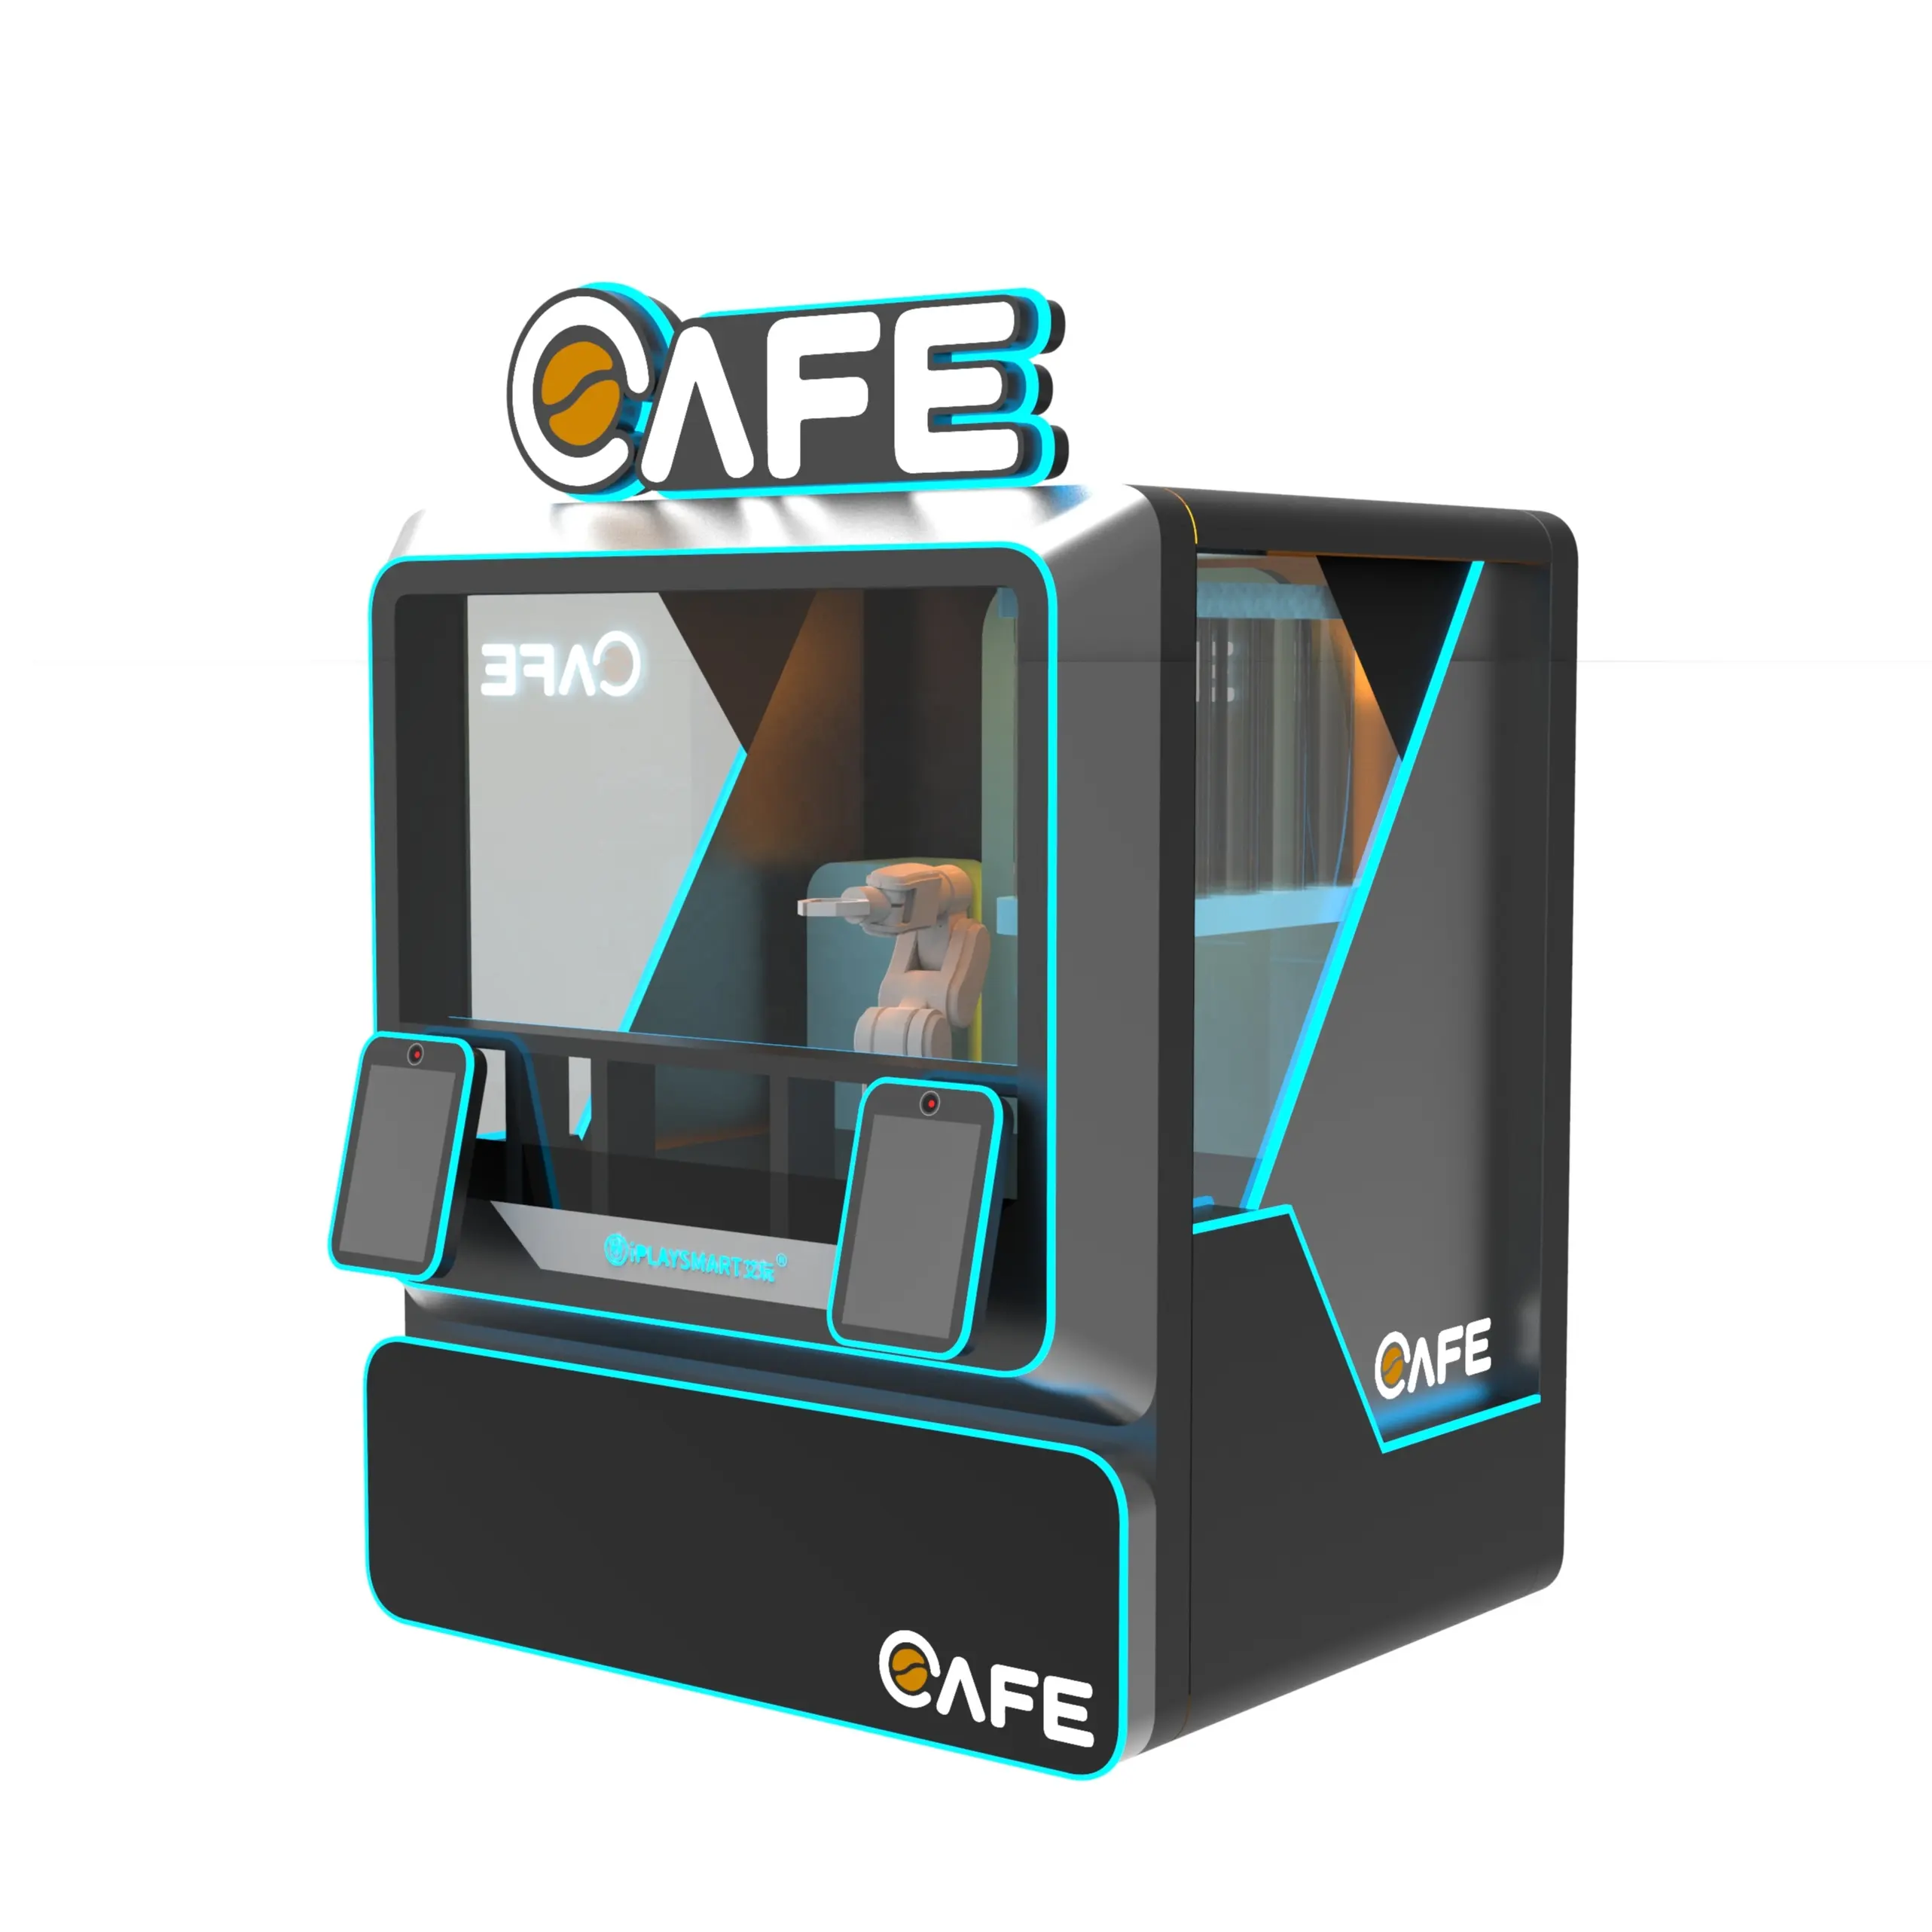 Robot Arm Vending Coffee Machine Snack And Saeco Coffee Vending Machines For Coffee Hot Freshly Ground Automated Commercial